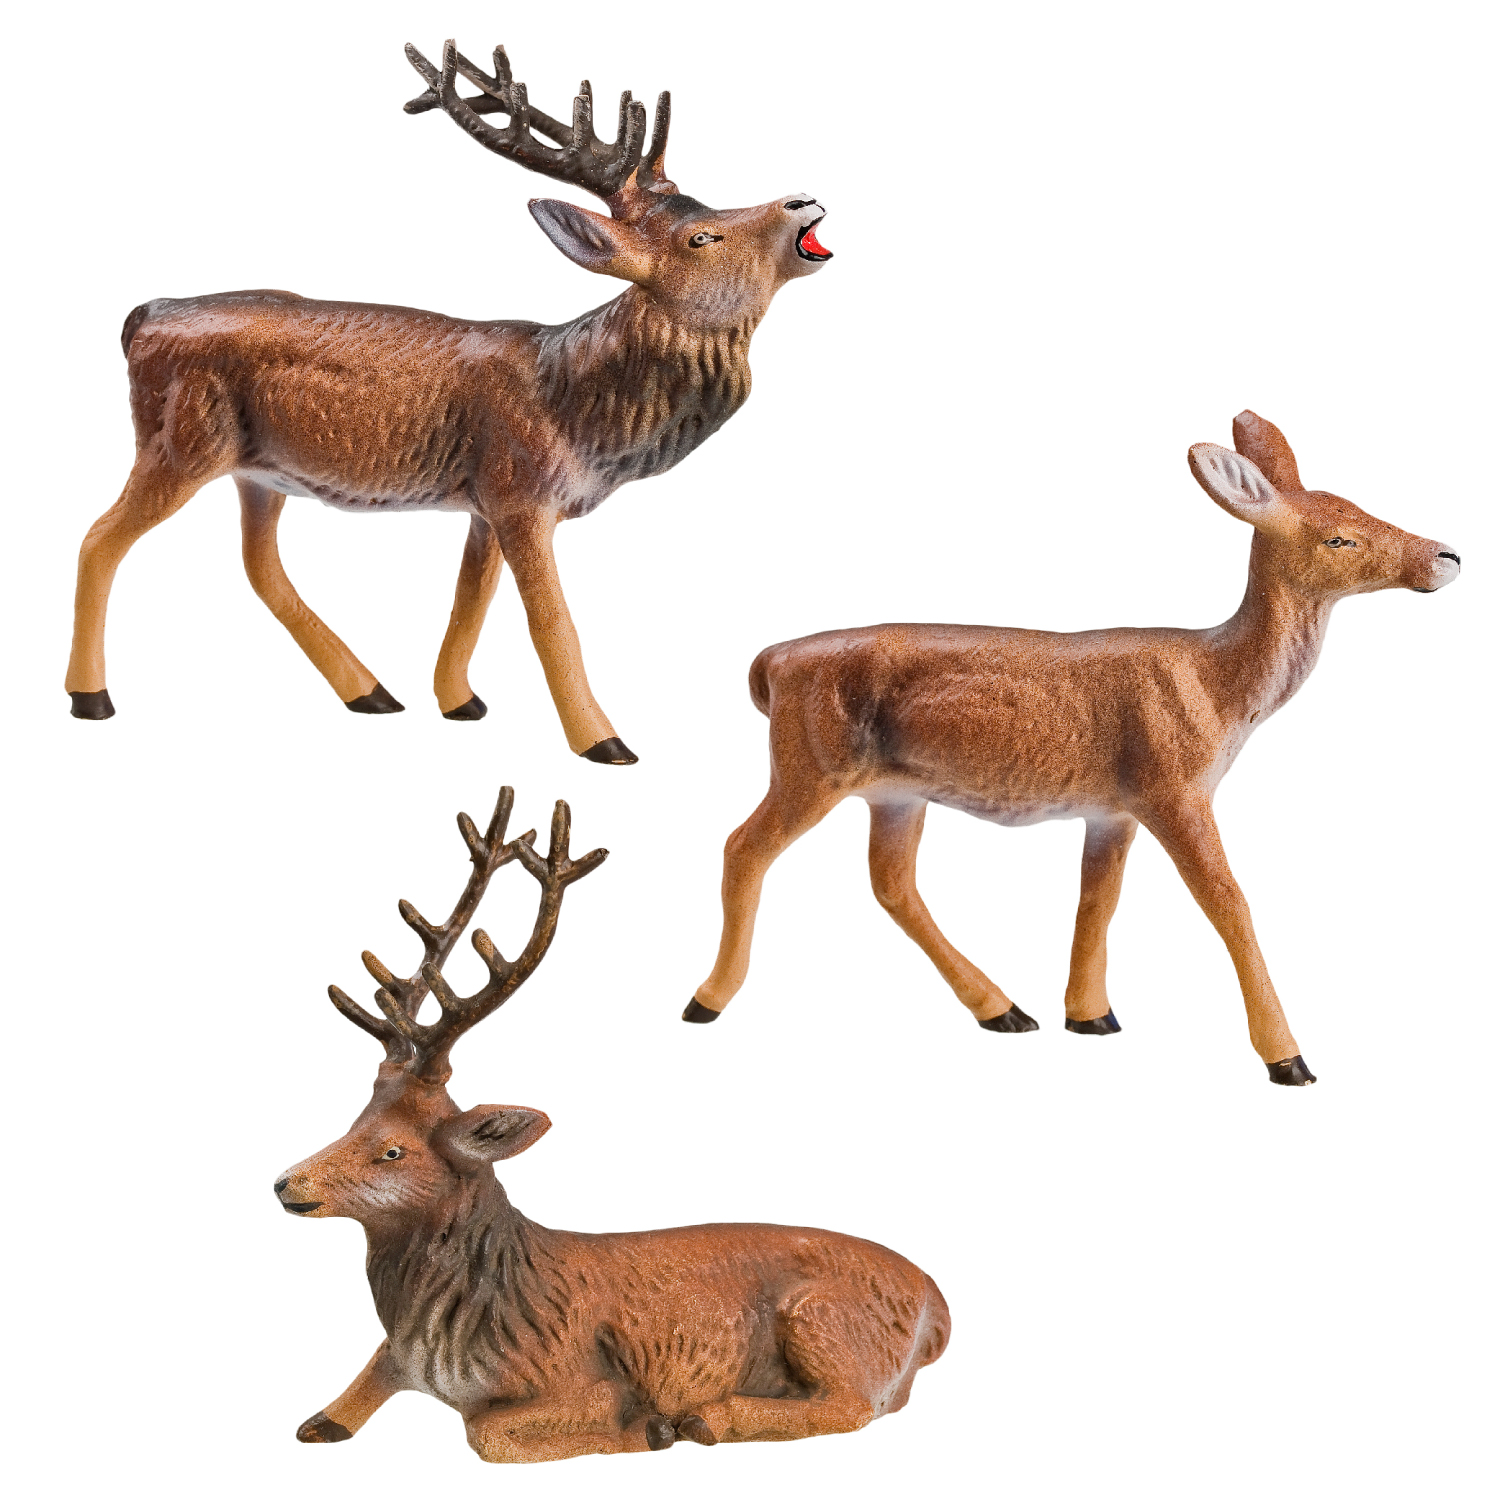 Group of 3 deer, to 3.5 up to 4 in. figures